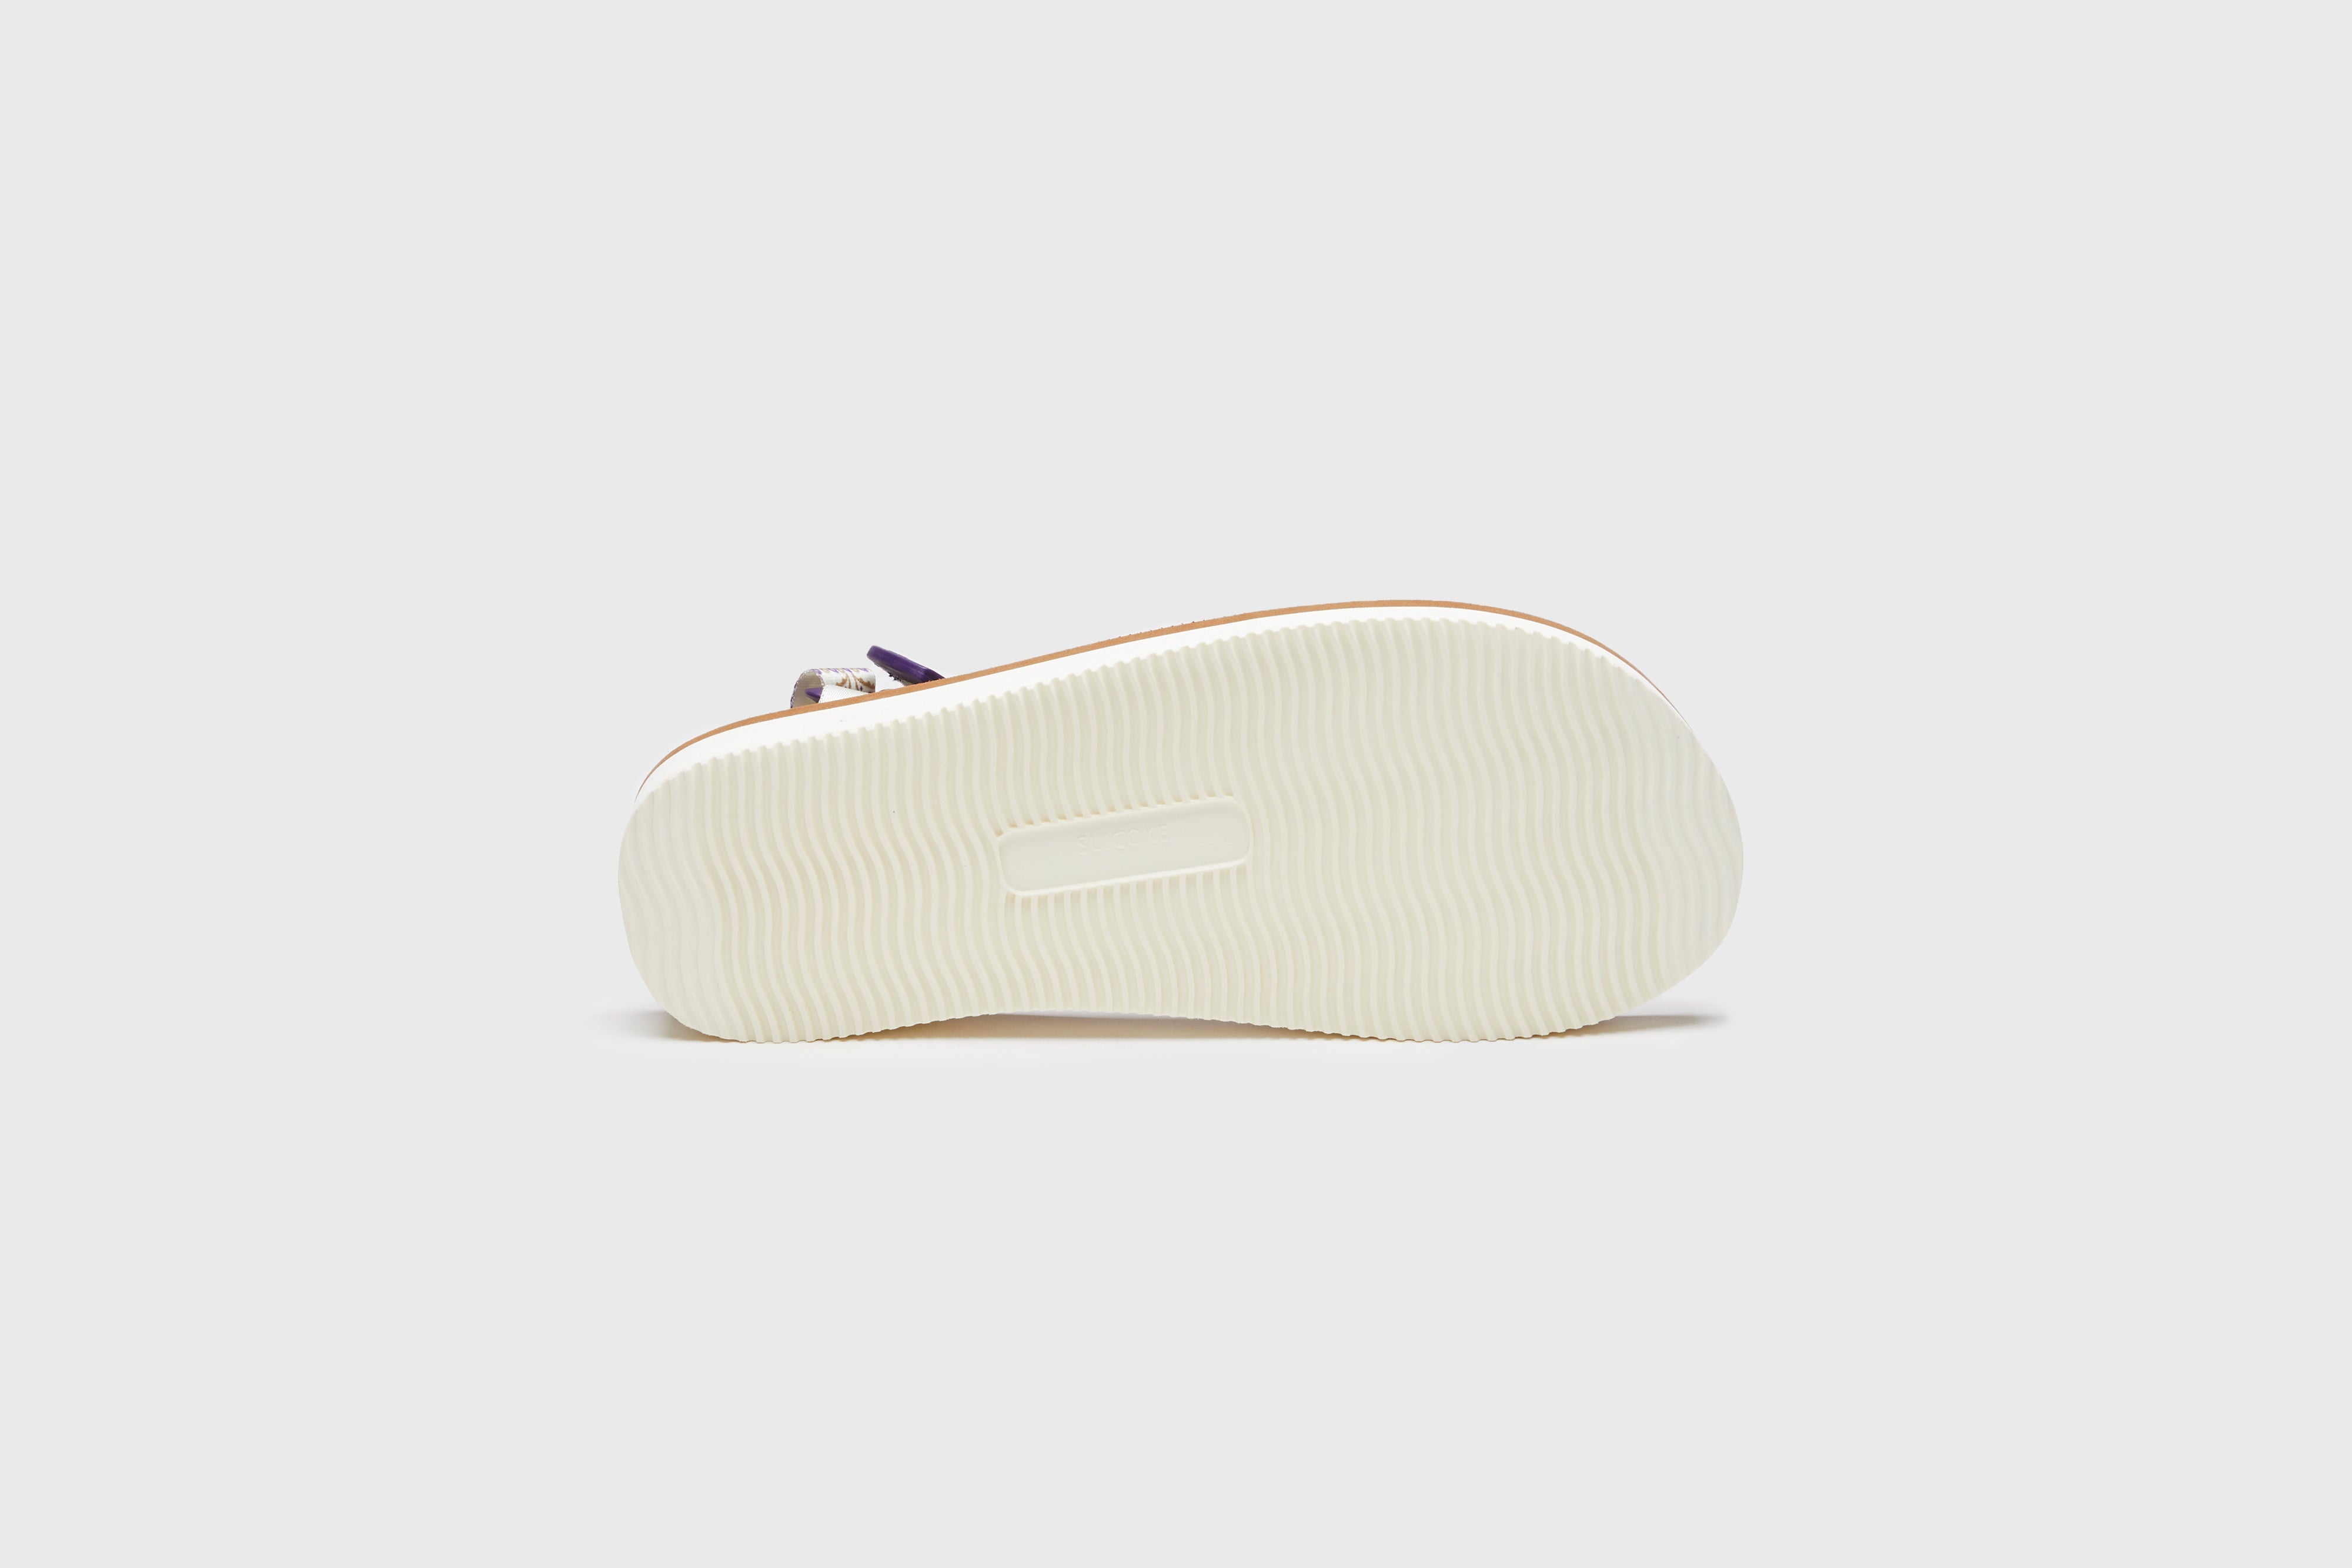 SUICOKE DEPA-Cab-PT05 sandals with ivory & brown nylon upper, ivory & brown midsole and sole, strap and logo patch. From Spring/Summer 2023 collection on eightywingold Web Store, an official partner of SUICOKE. OG-022CAB-PT05 IVORY X BROWN